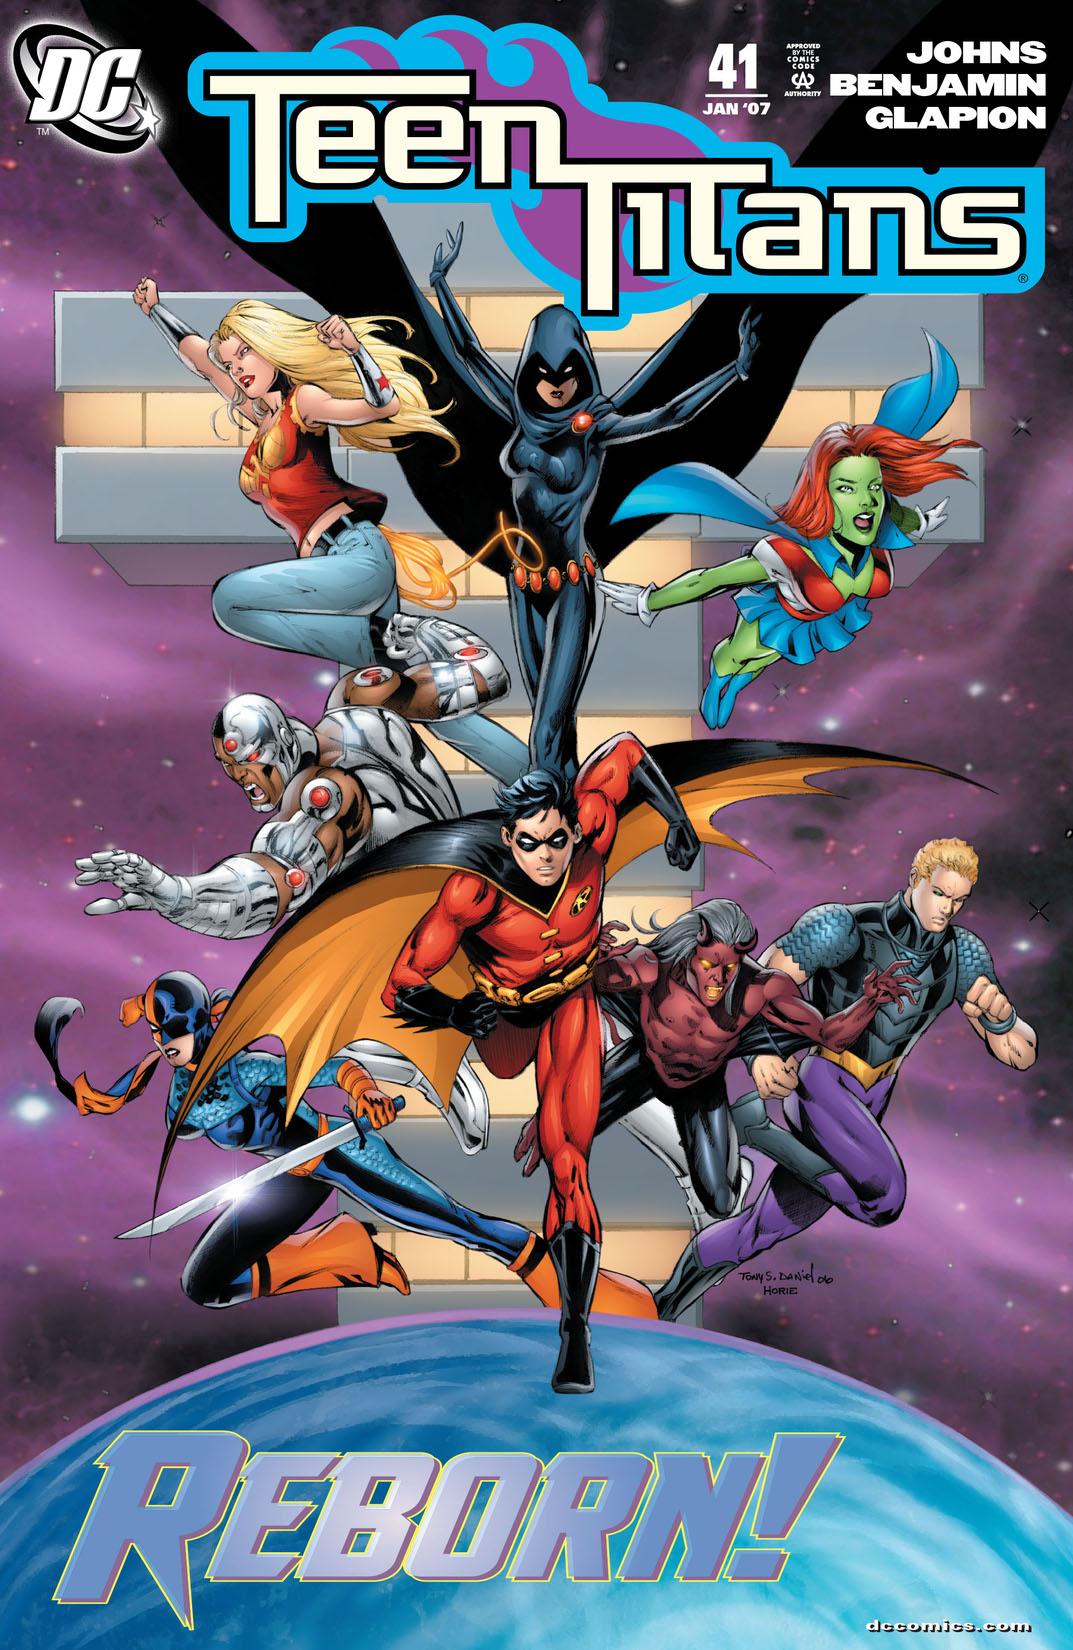 Teen Titans (2003-) #41 preview images